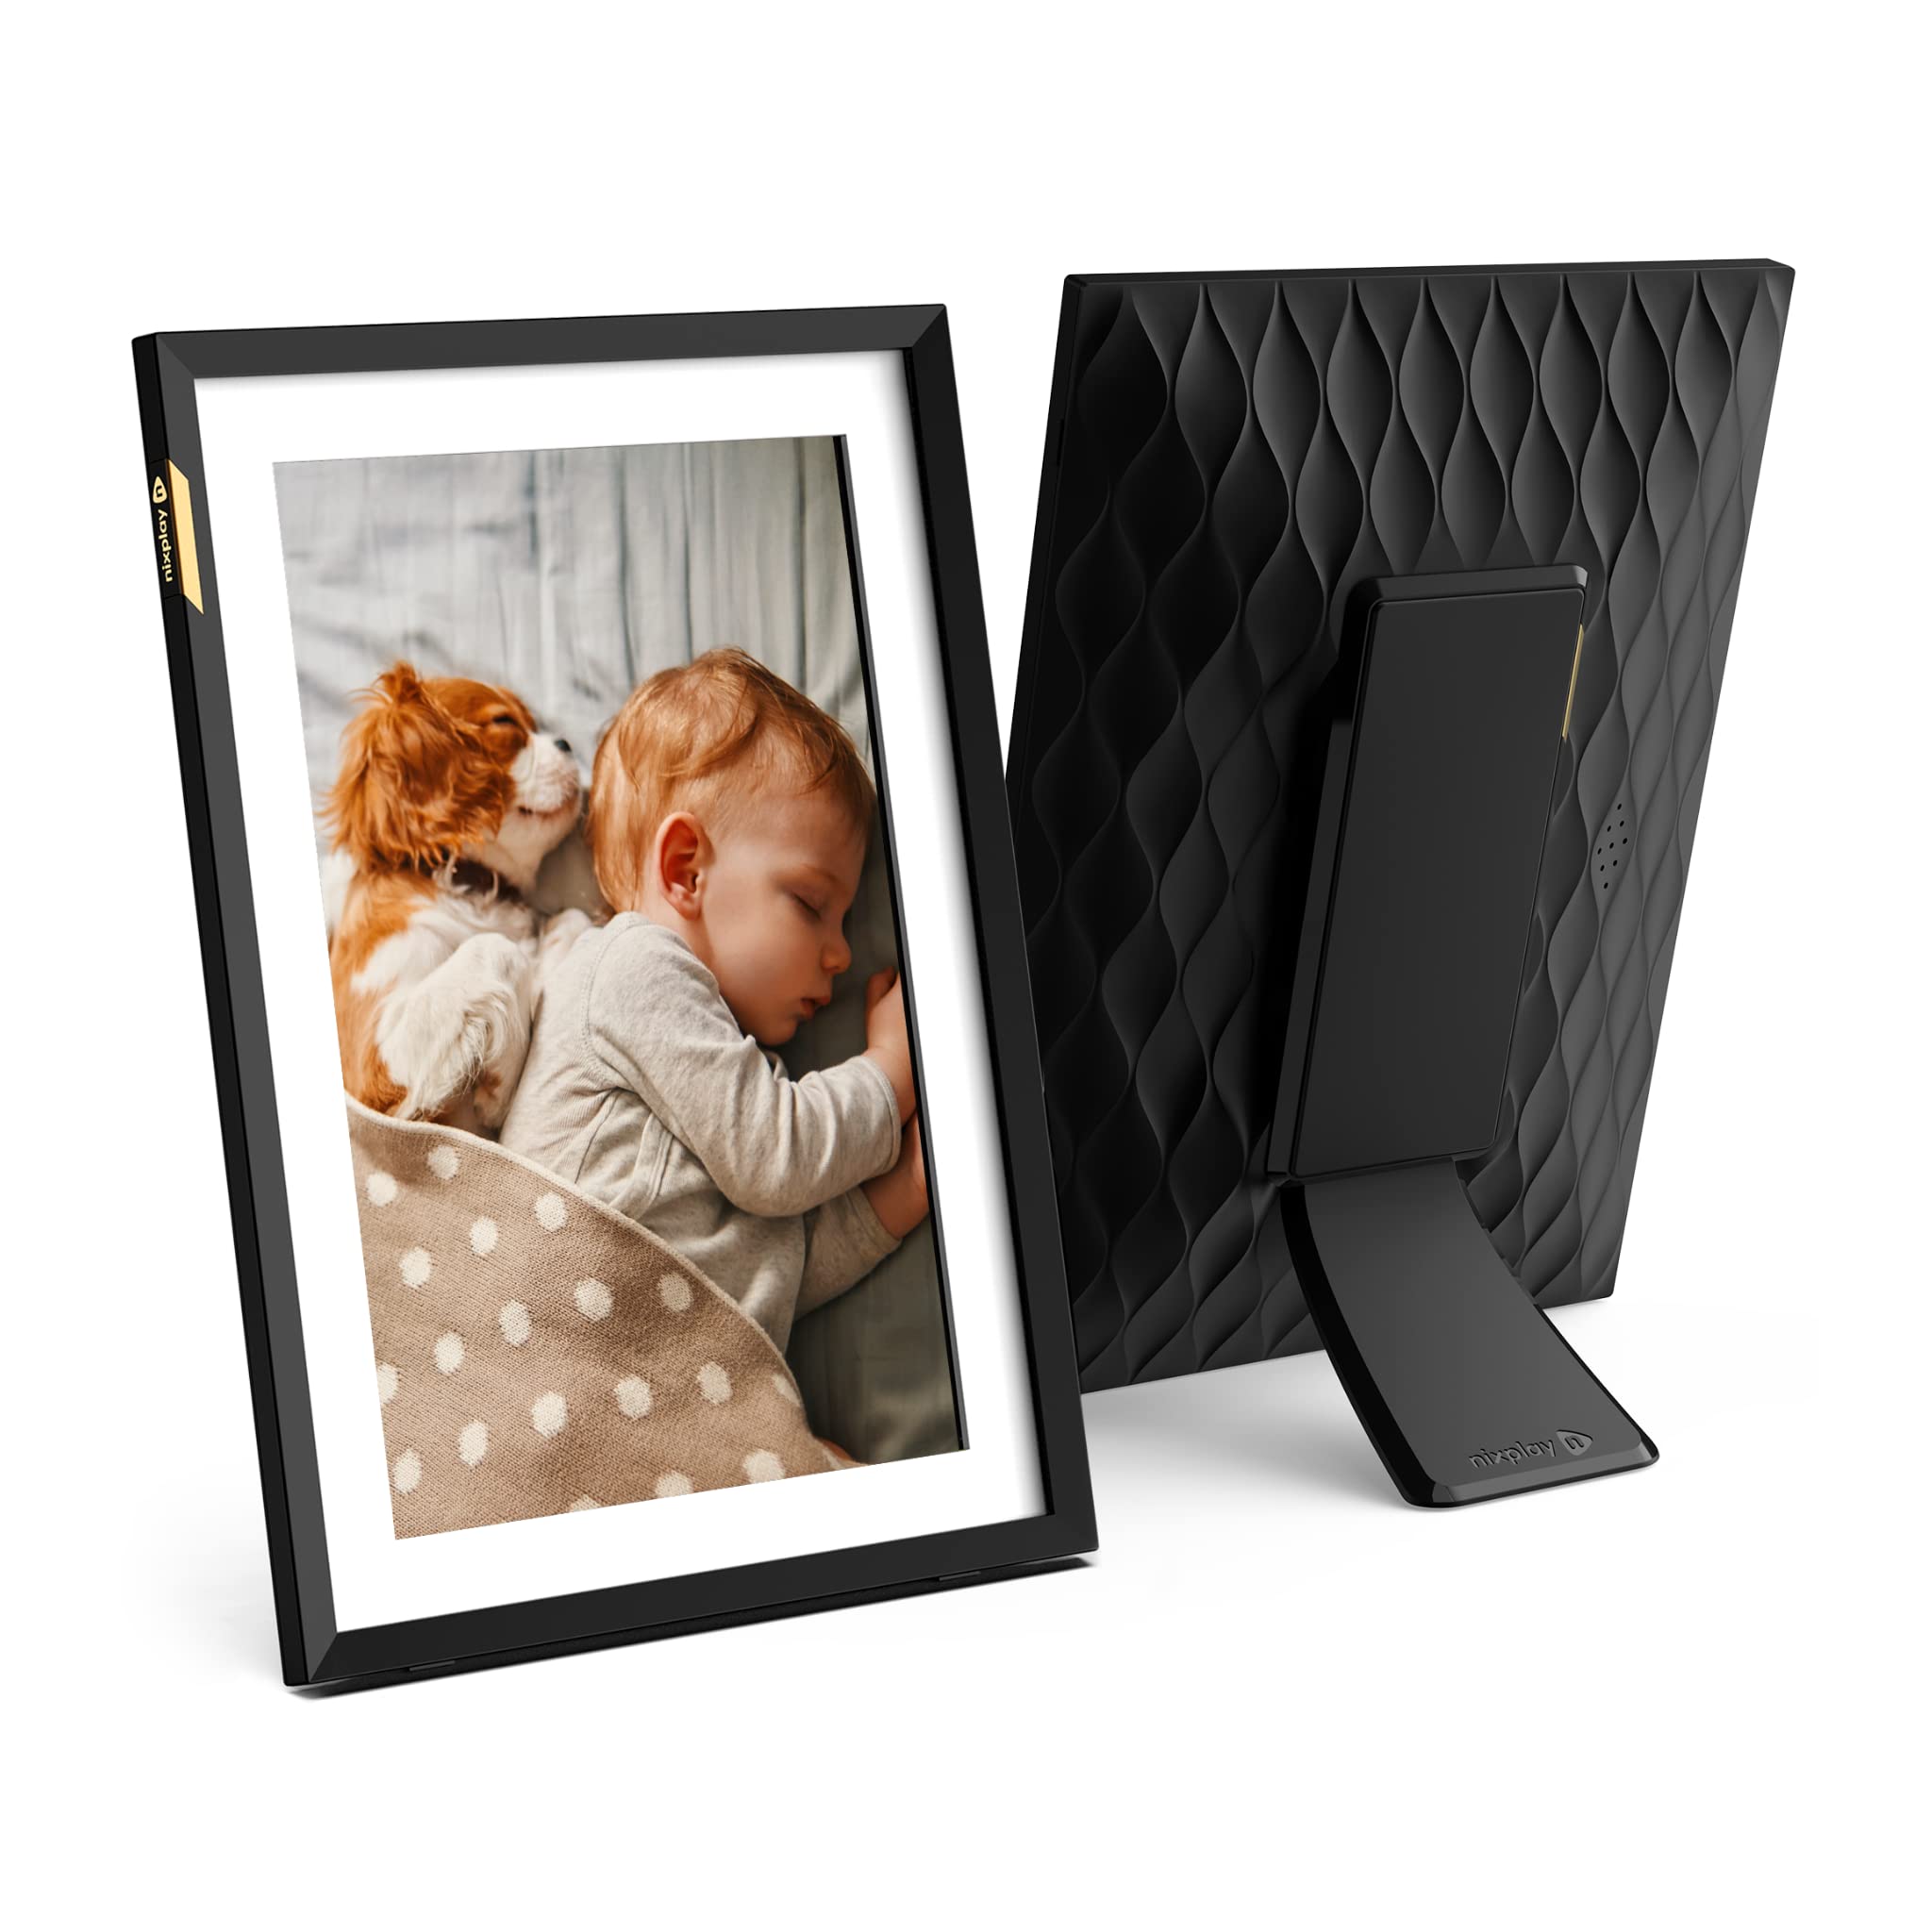 Nixplay 10.1 inch Touch Screen Smart Digital Picture Frame with WiFi (W10P) - Black Classic Matte - Share Photos and Videos Instantly via Email or App - Preload Content